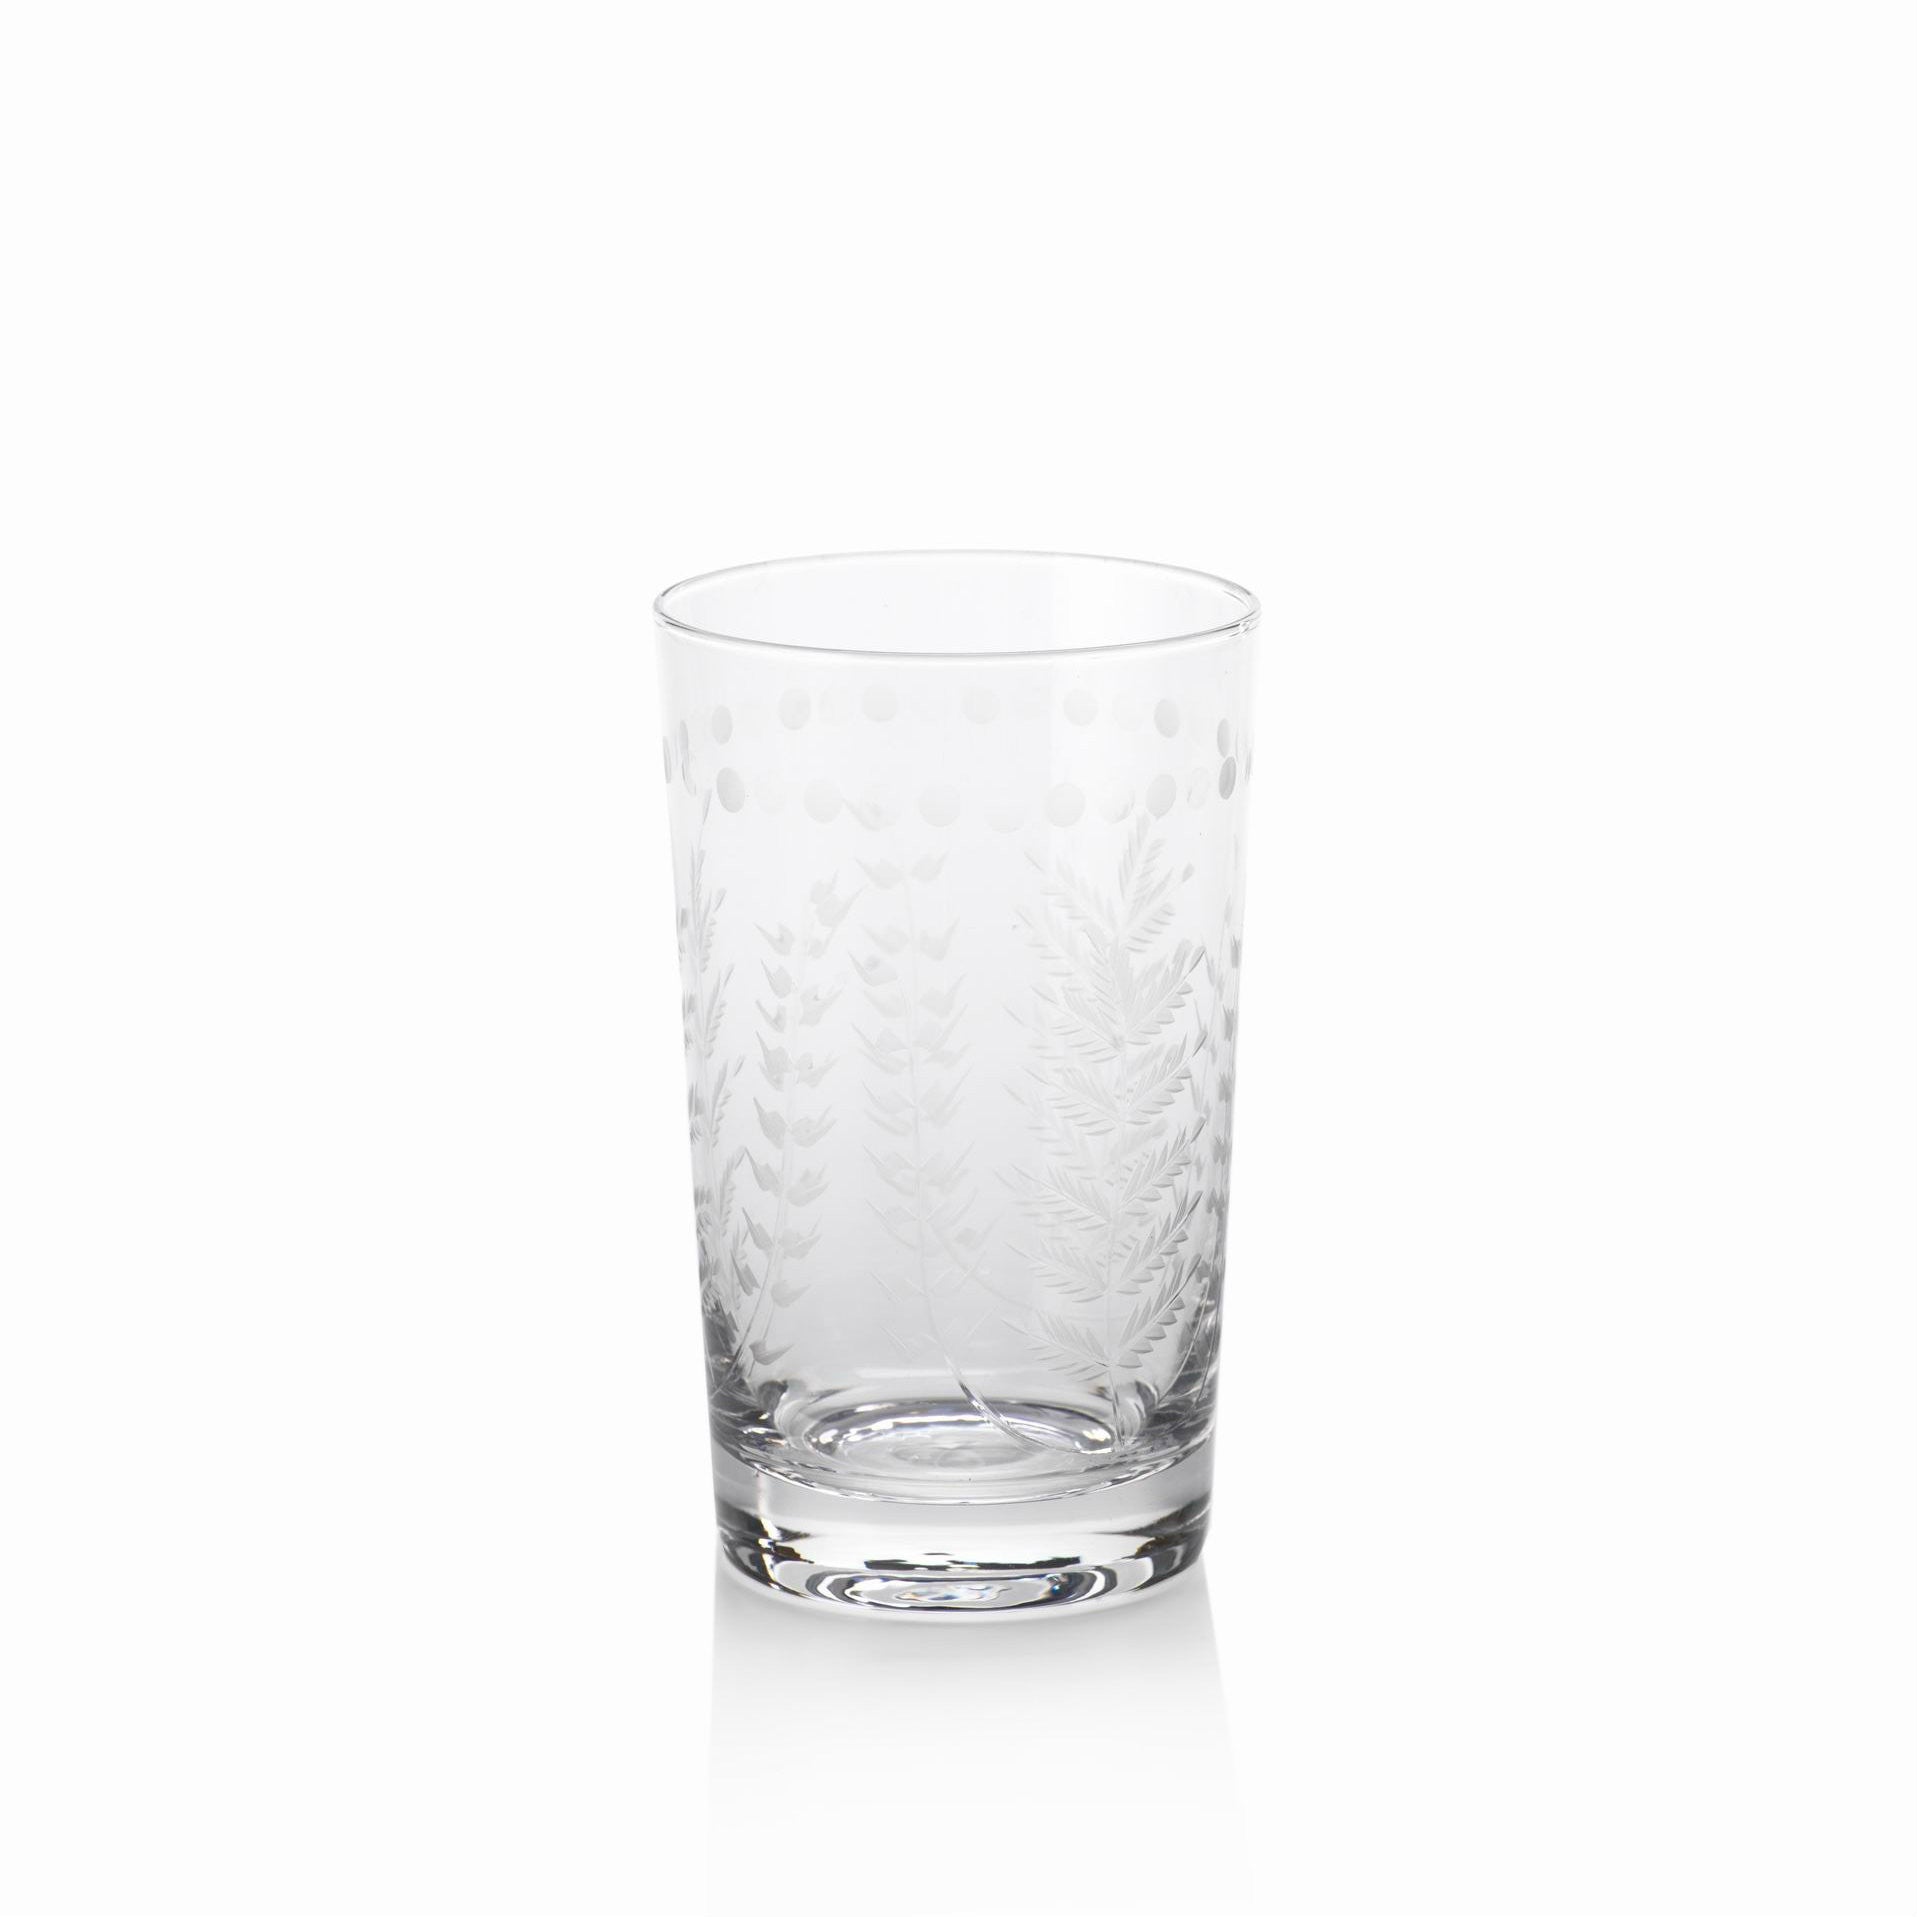 Spring Leaves Glassware - Set of 4 - CARLYLE AVENUE